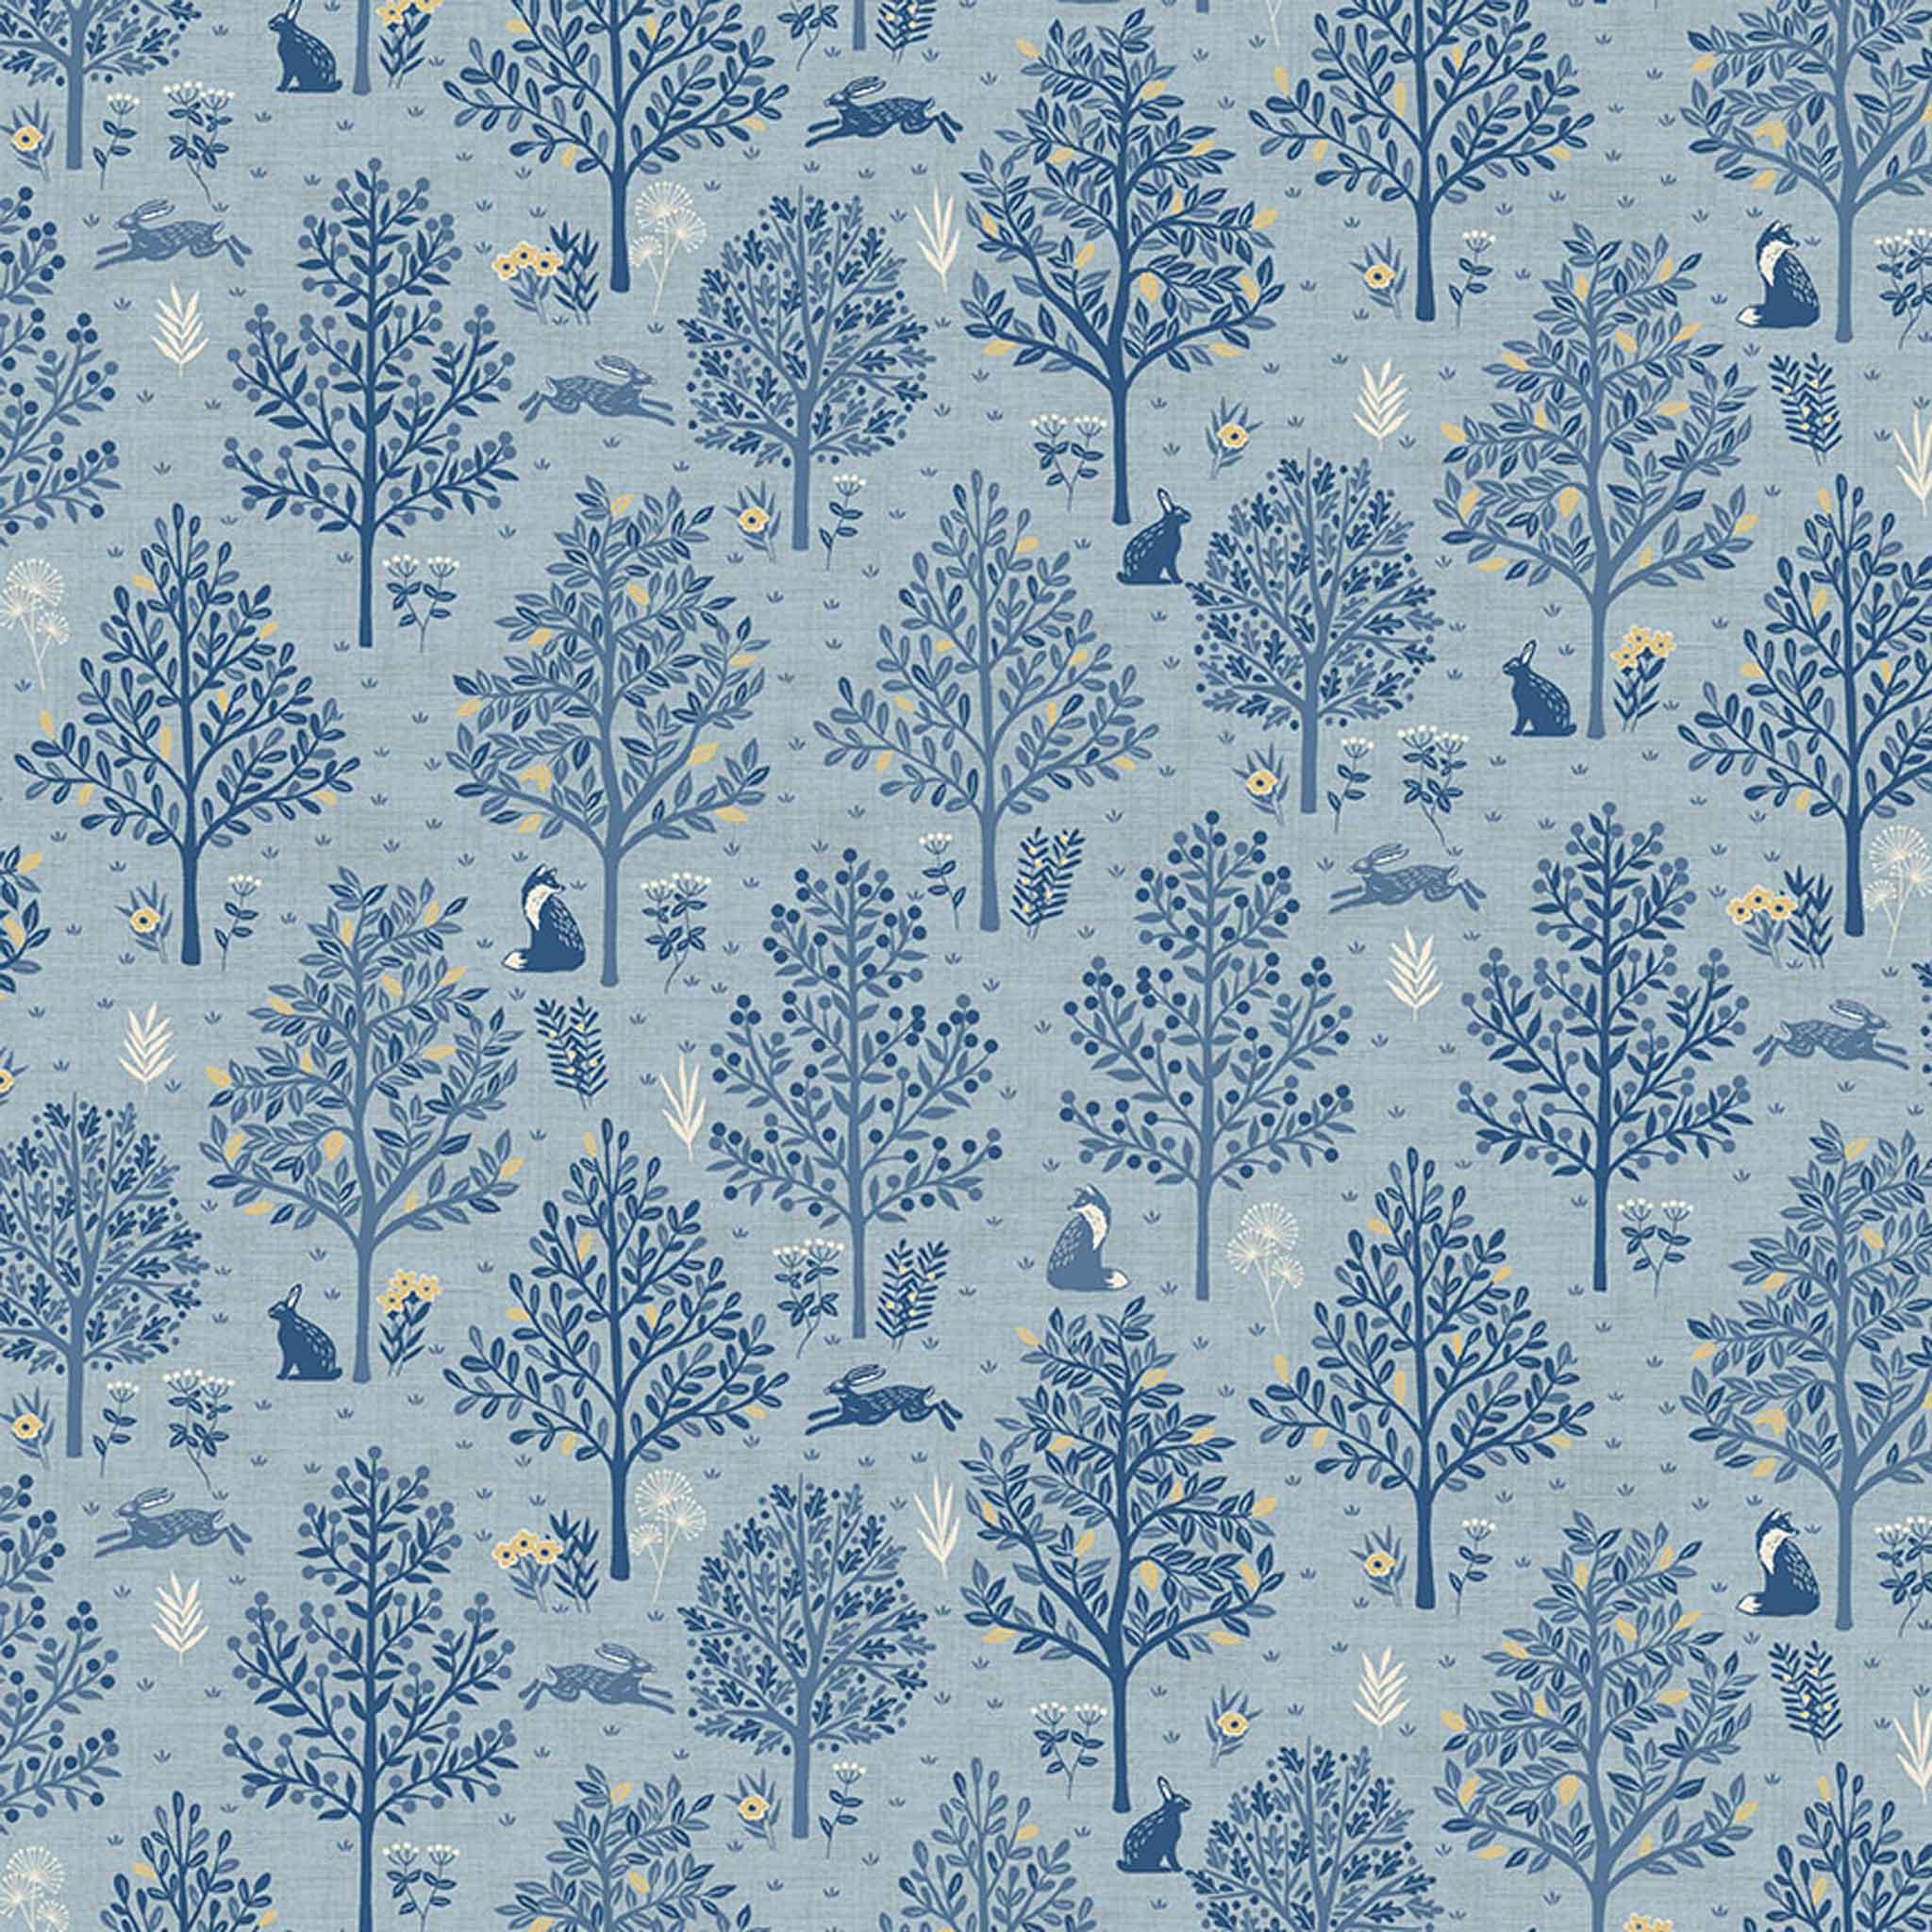 Trees Cotton Fabric Blue Makower 2416/B - Hedgerow Collection